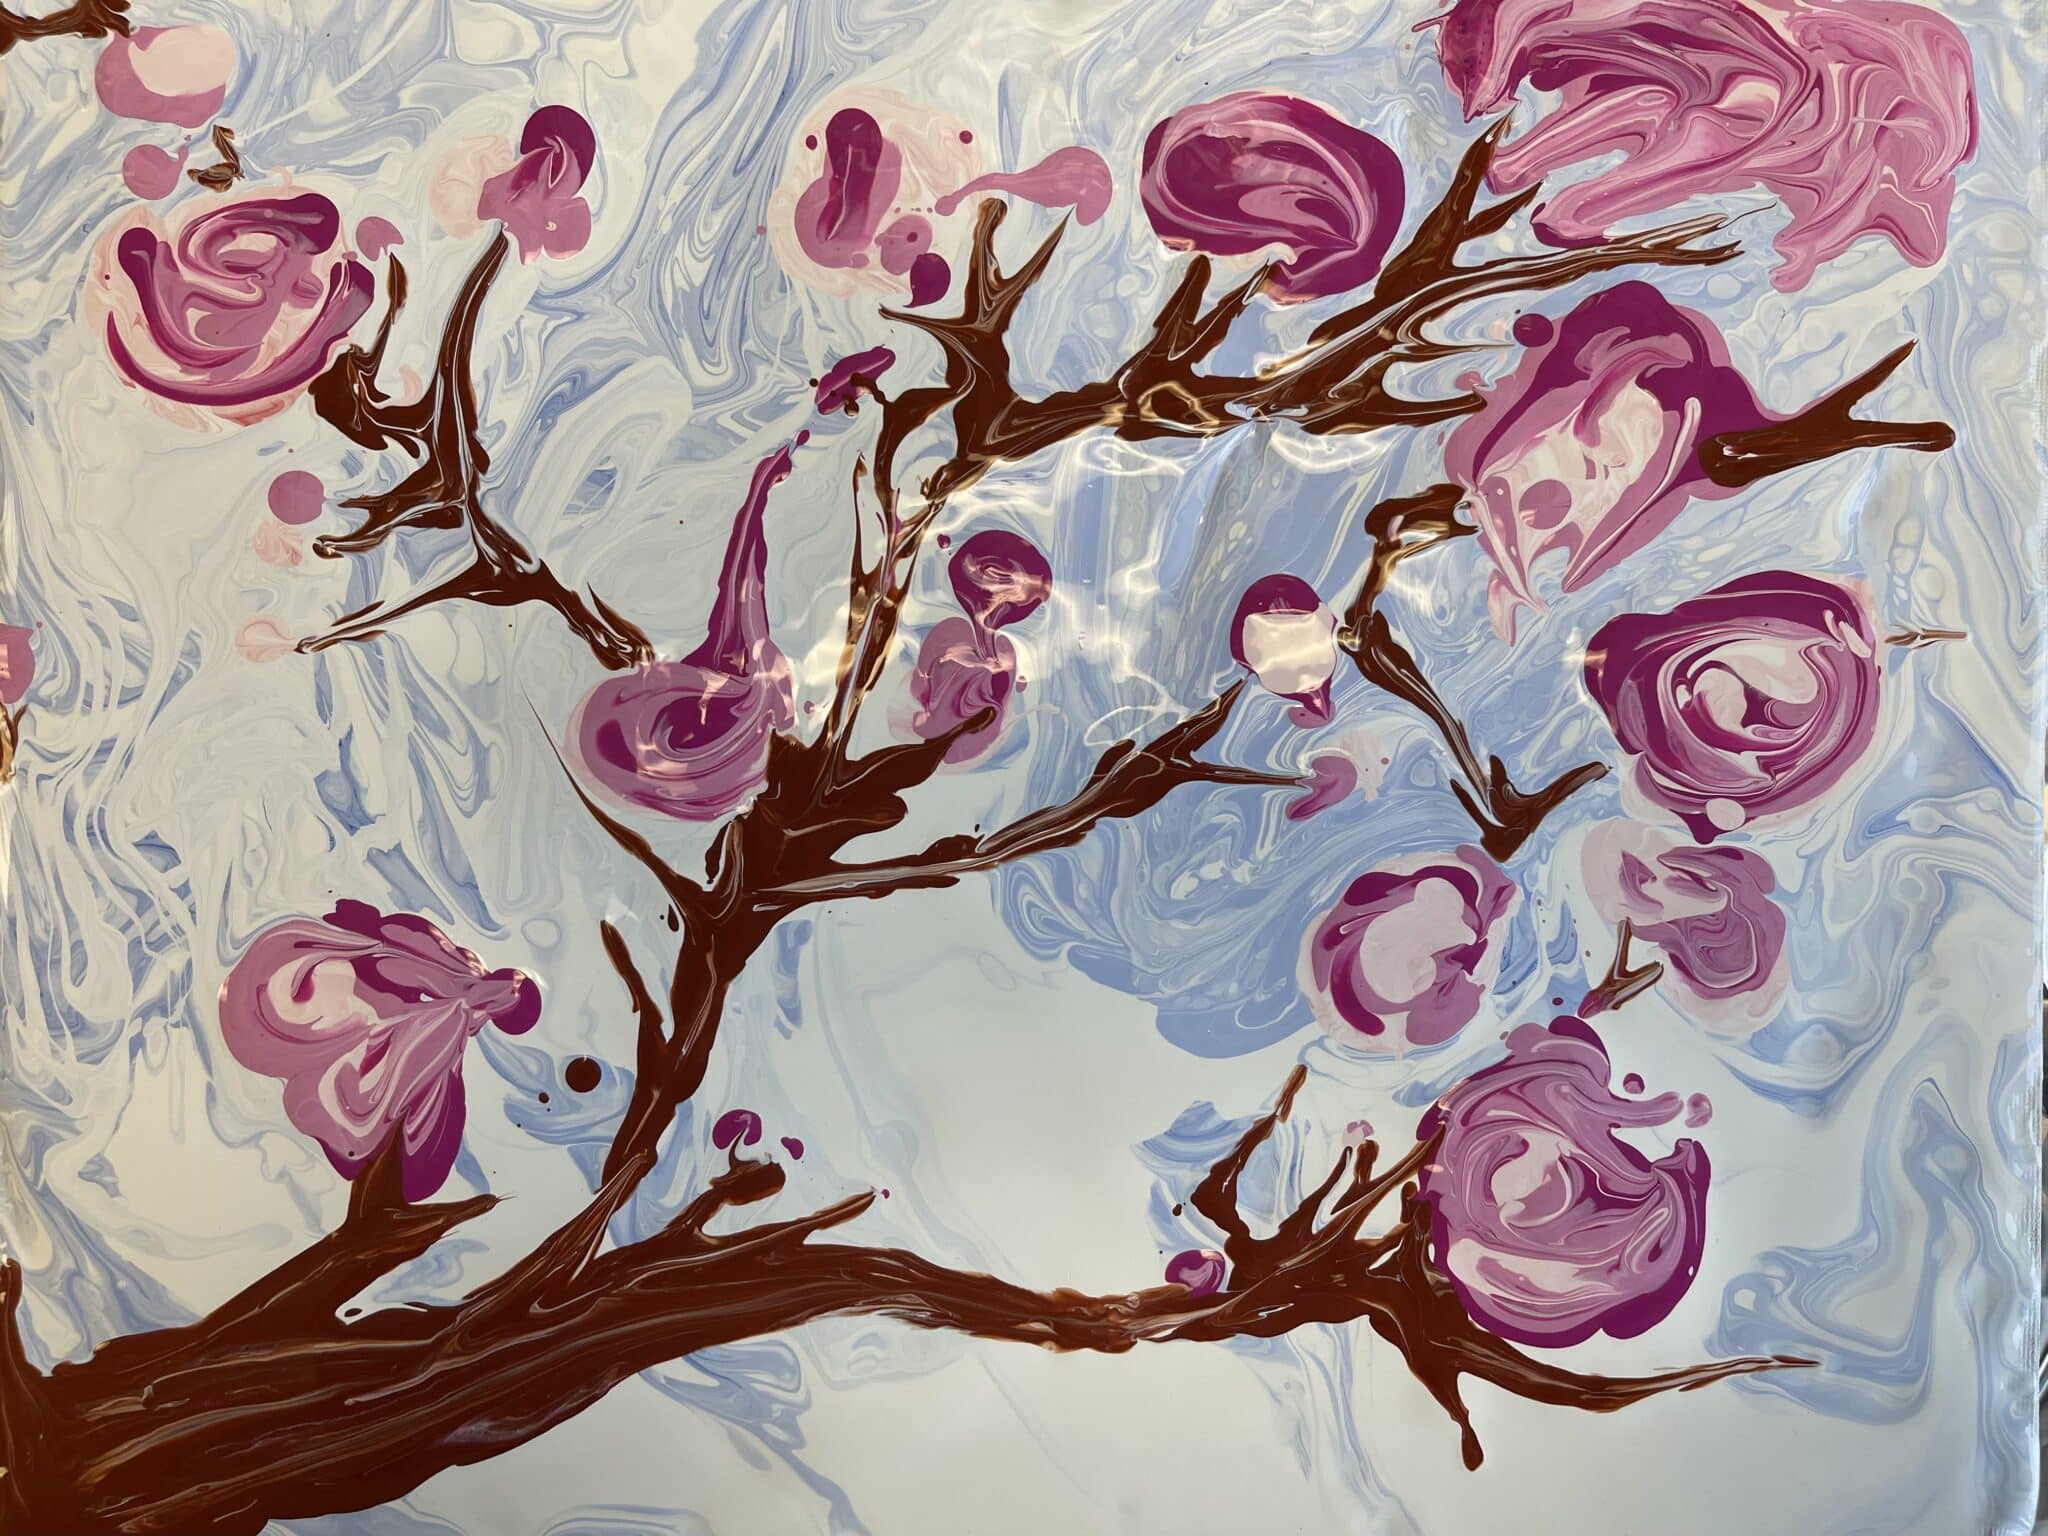 A pour art and acrylic painting of Sakura flowers.